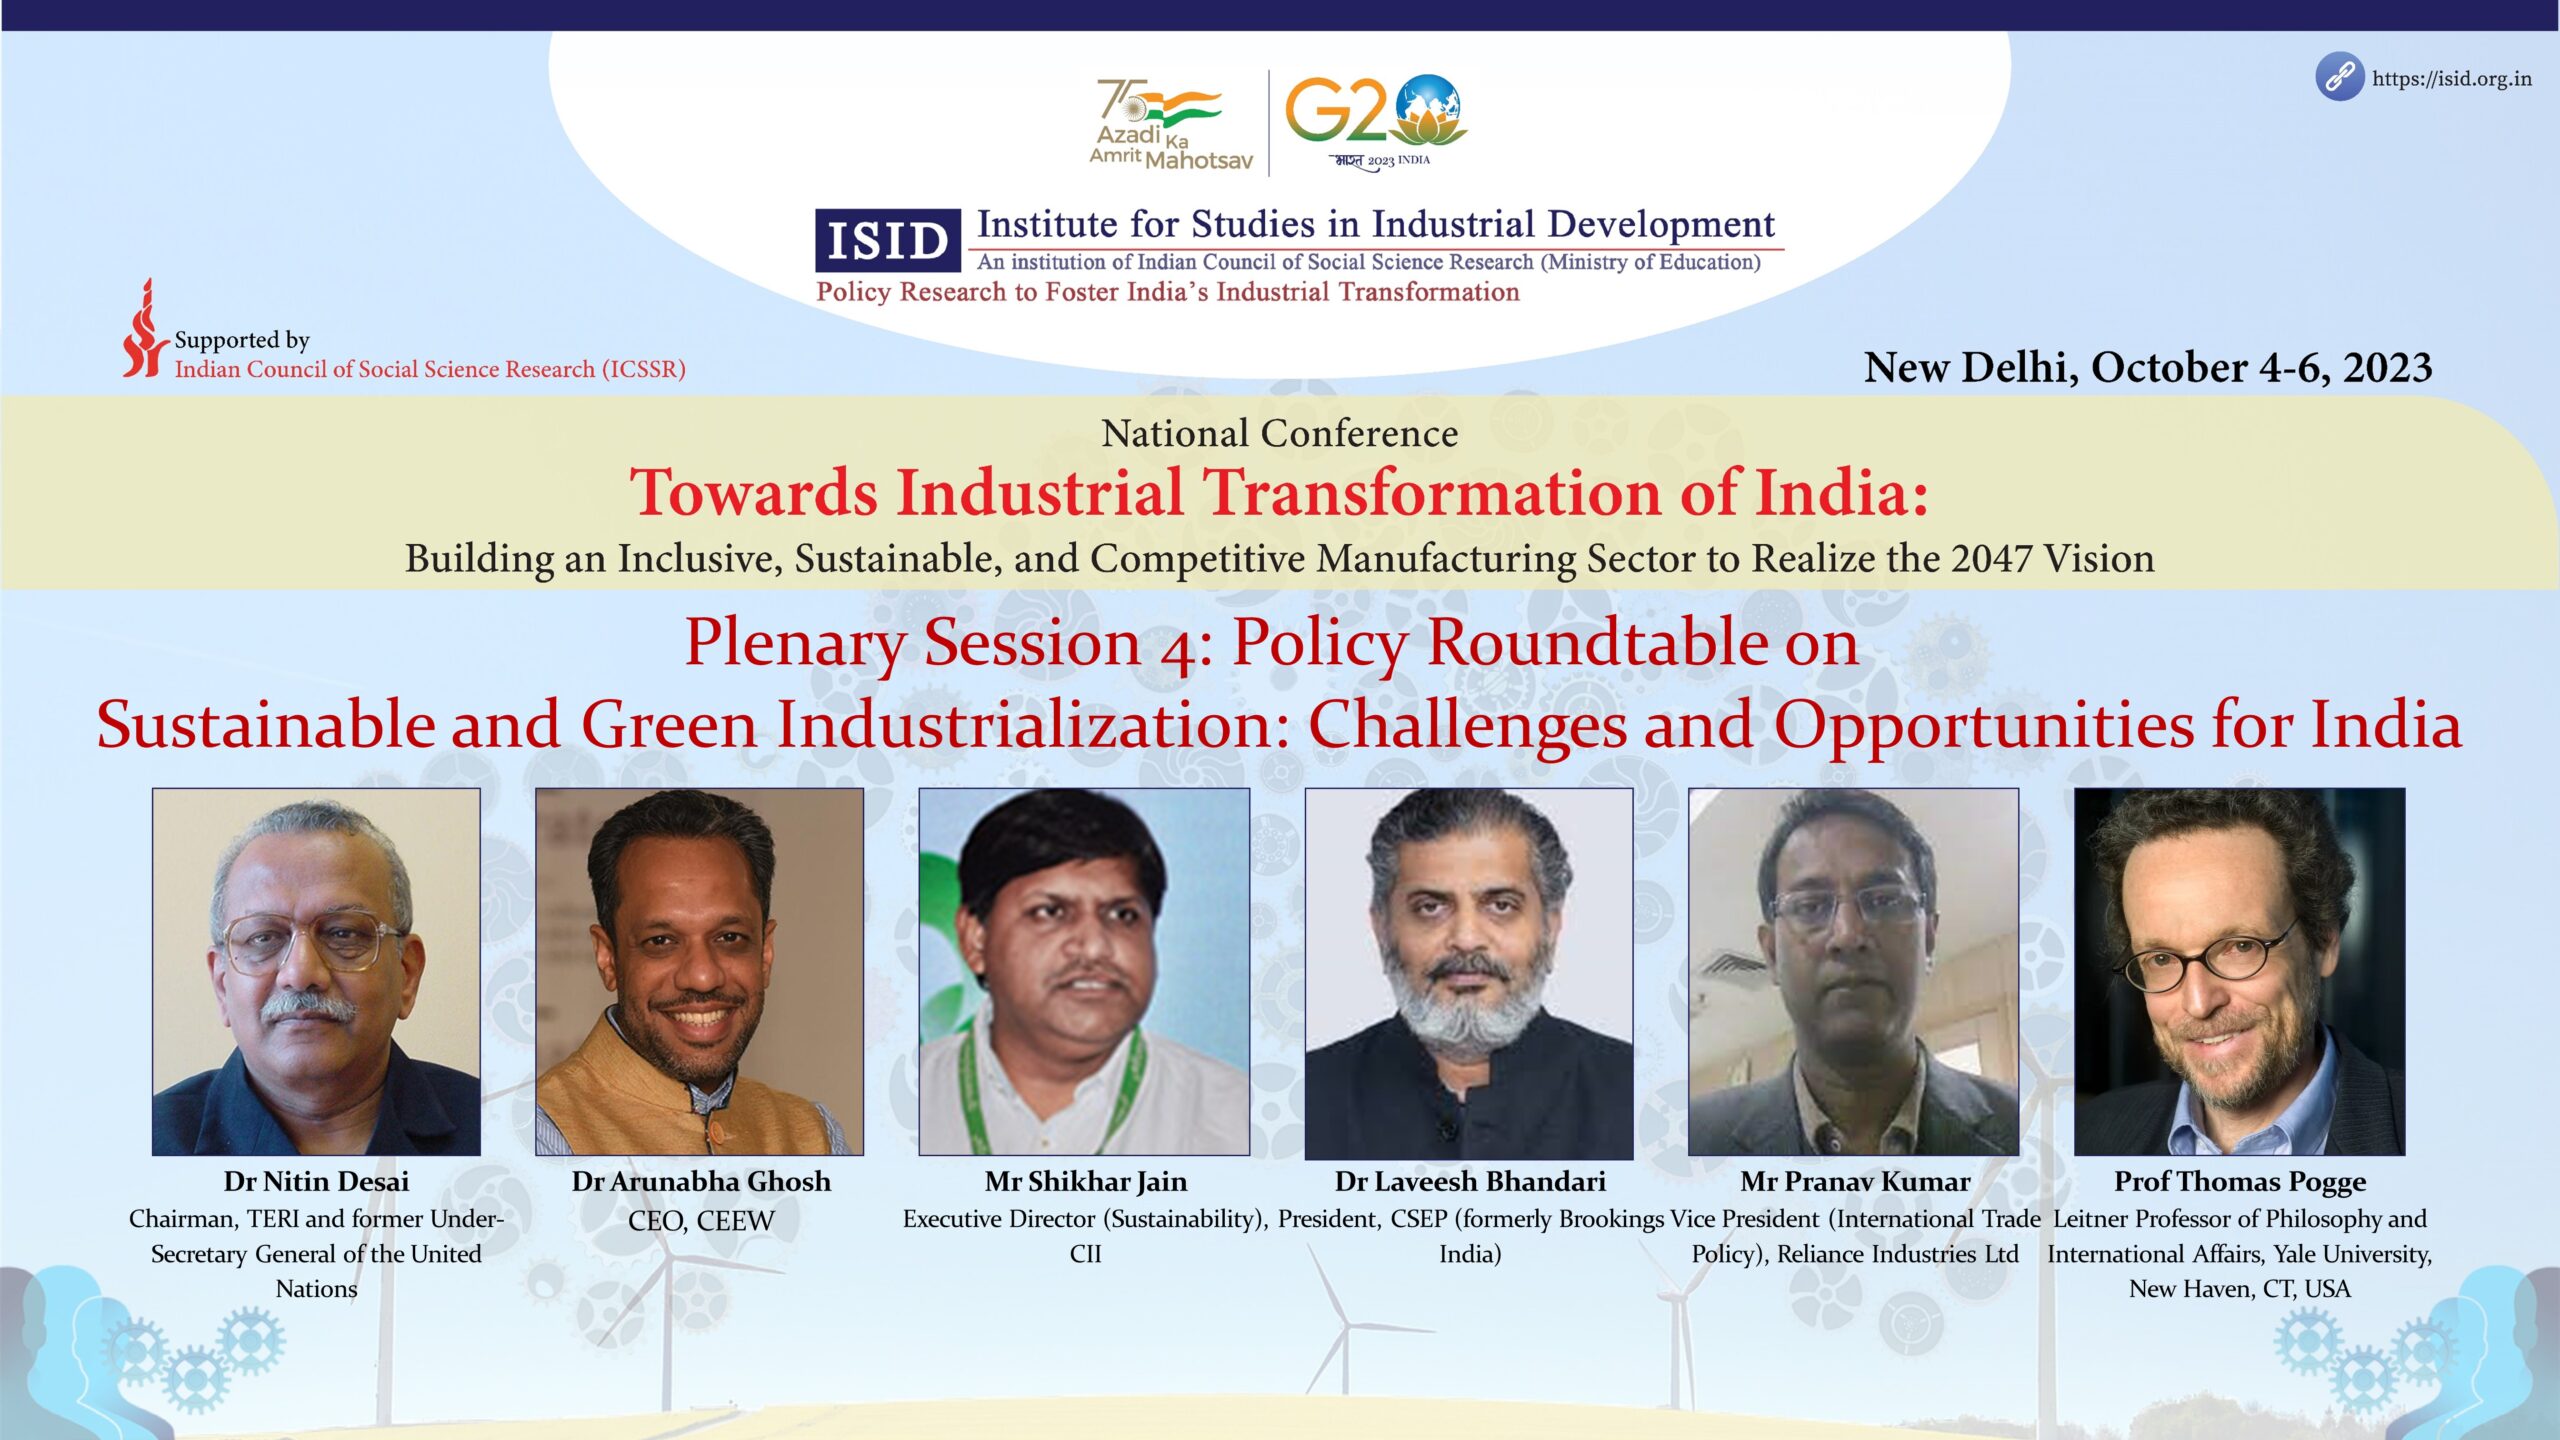 Plenary Session 4: Policy Roundtable on Sustainable and Green Industrialization: Challenges and Opportunities for India